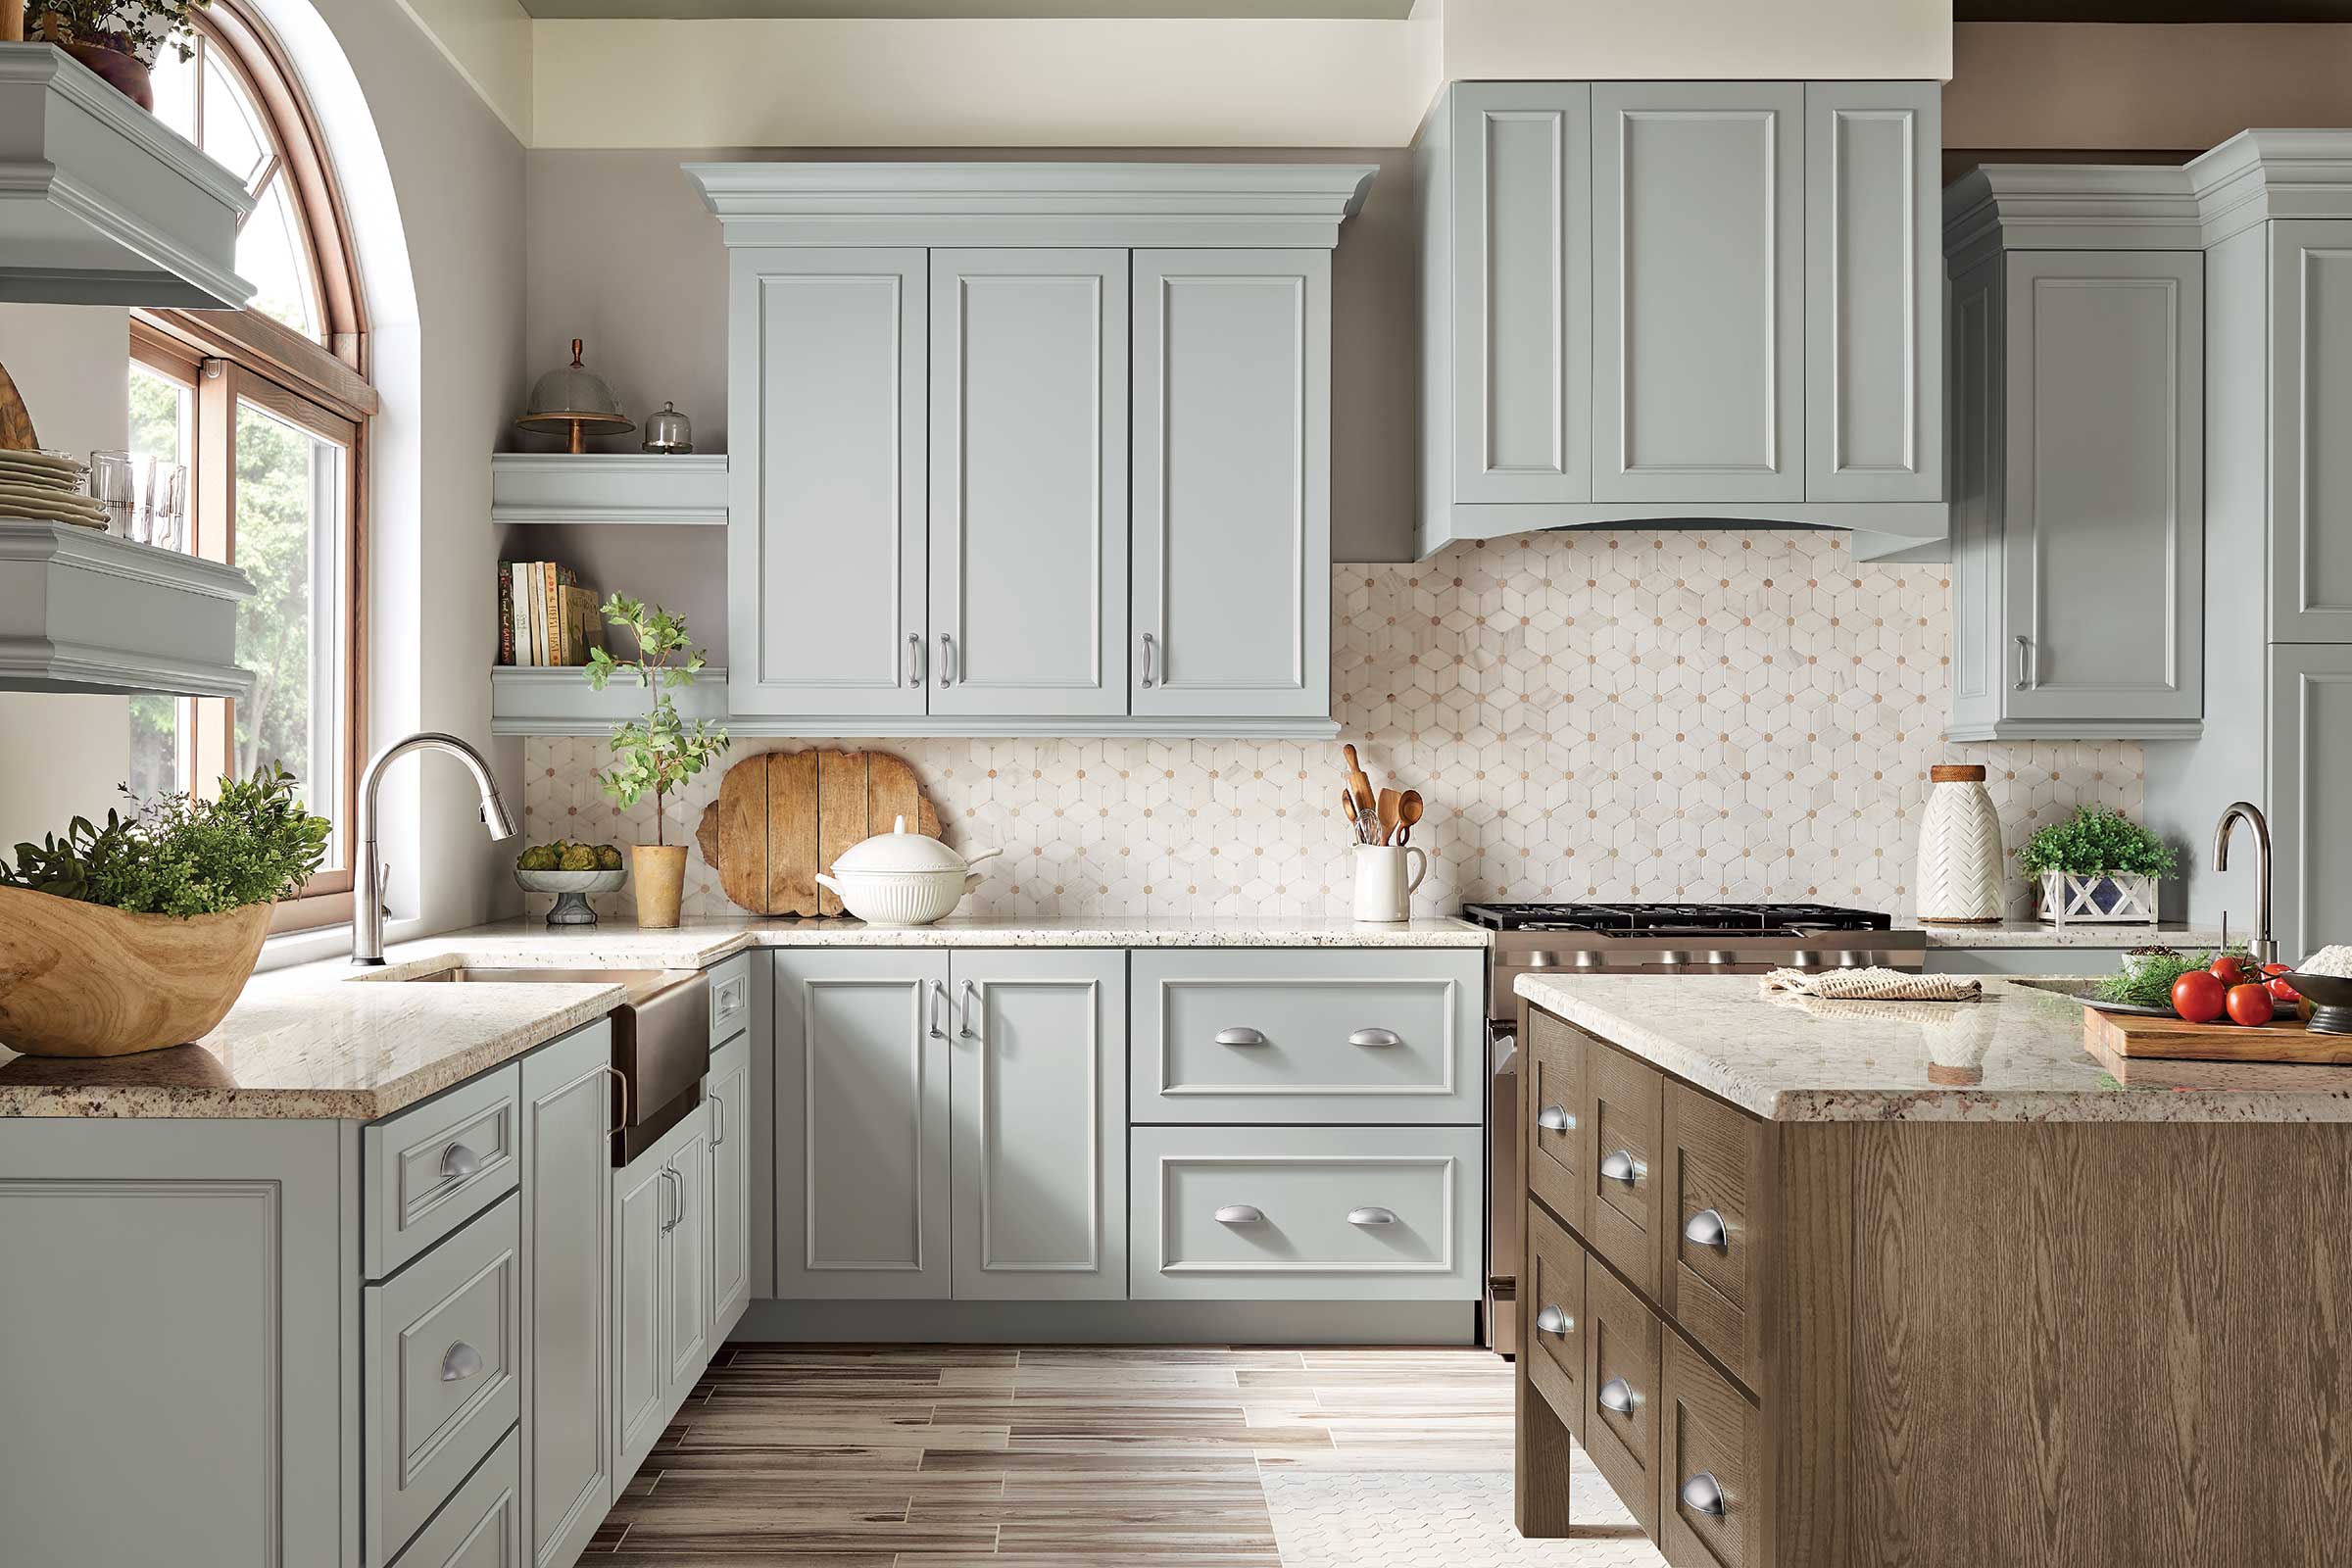 Kitchen Color Schemes, How To Pick Your Kitchen Colors